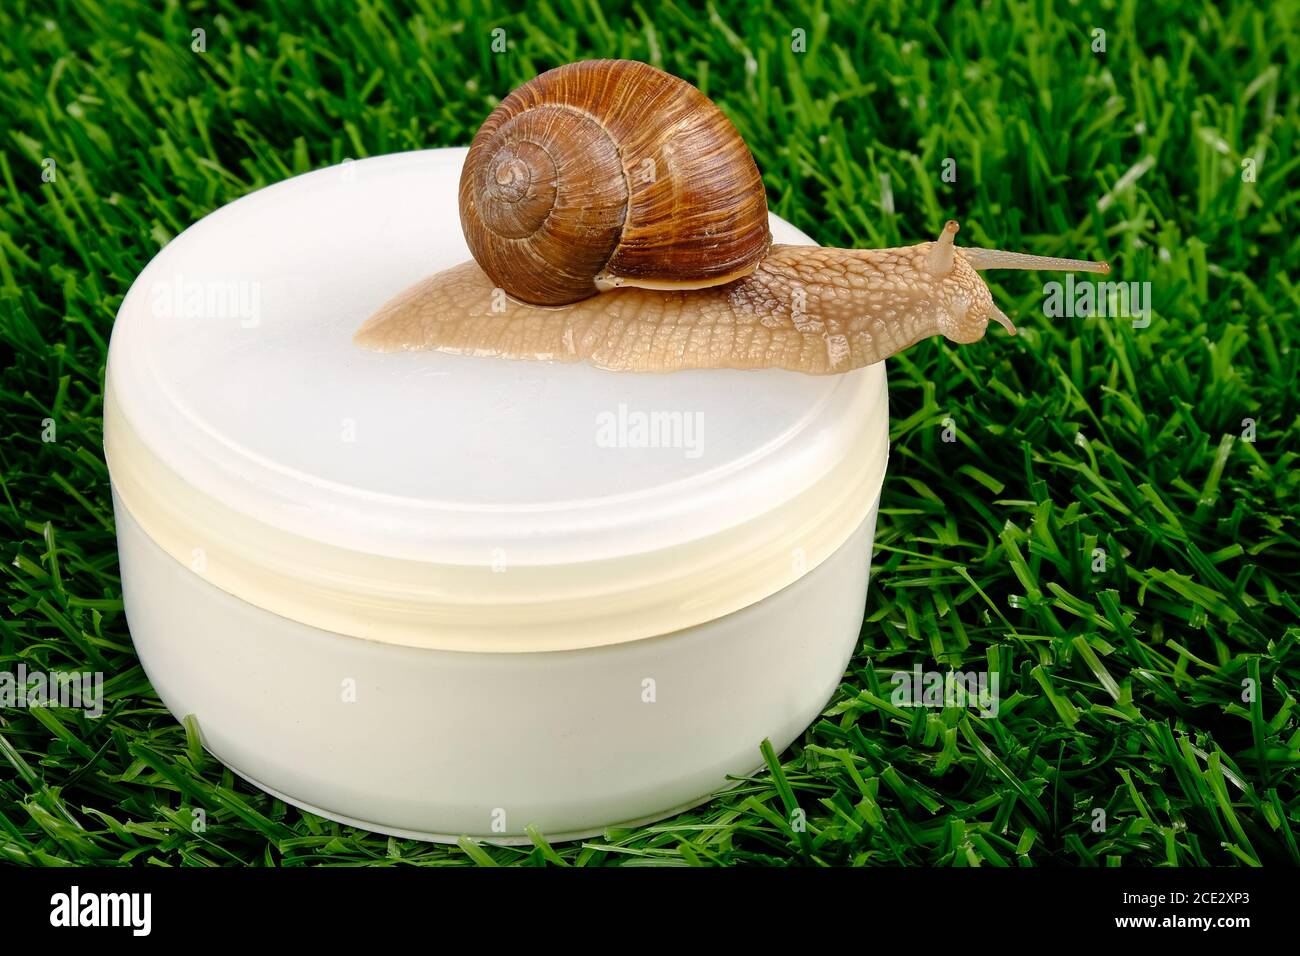 snail cosmetics on green grass, beauty skin care products. Stock Photo